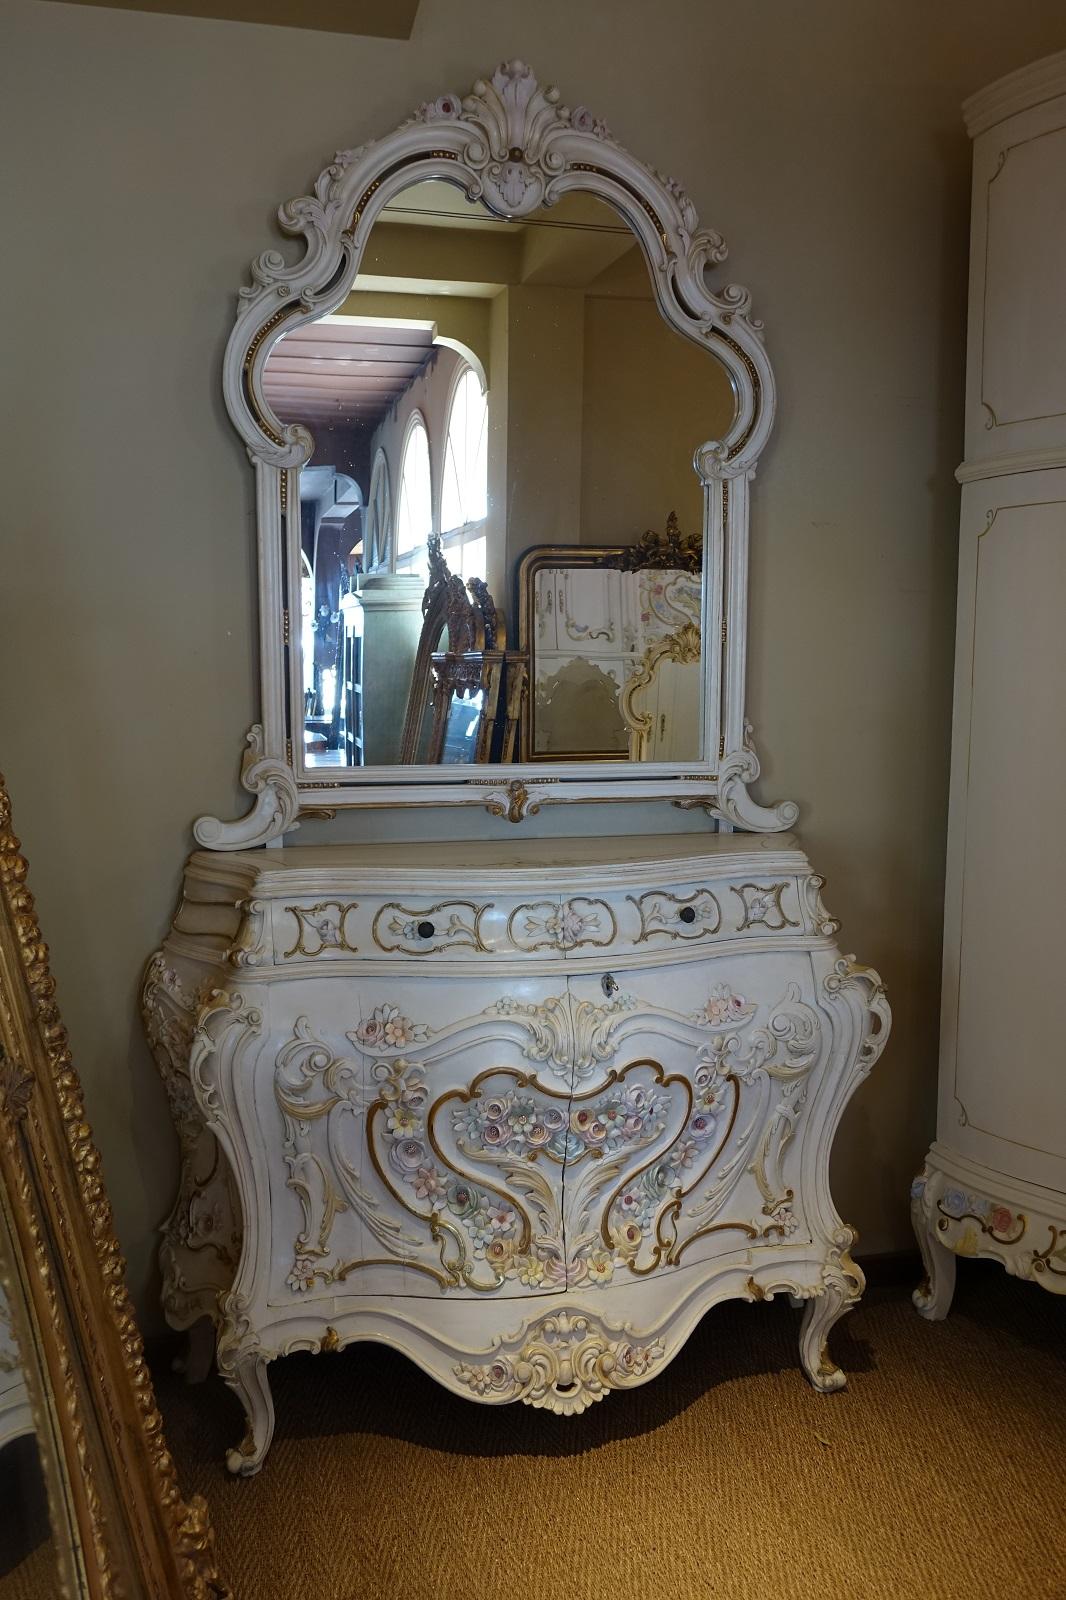 This is a unique Italian early 20th century a painted complete bedroom set, very impressive by its size and the quality of the carving.
The set is composed by a king-size bed, two bedside tables, a large armoire with 12 doors and a vanity.